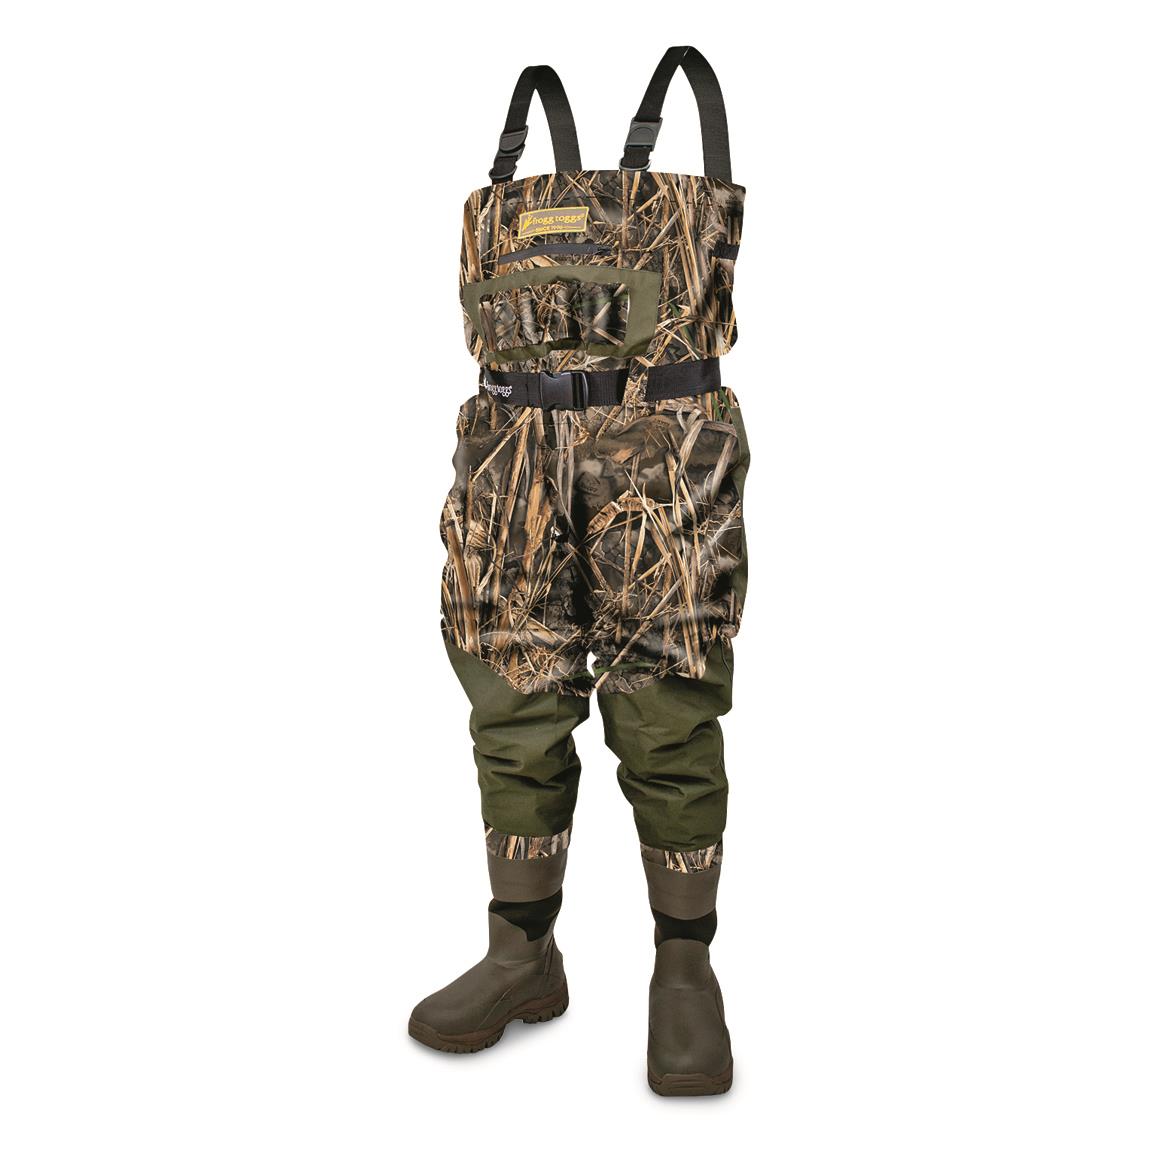 frogg toggs Grand Refuge 3.0 Breathable Insulated Chest Waders, 1,200-gram, Realtree Max-7